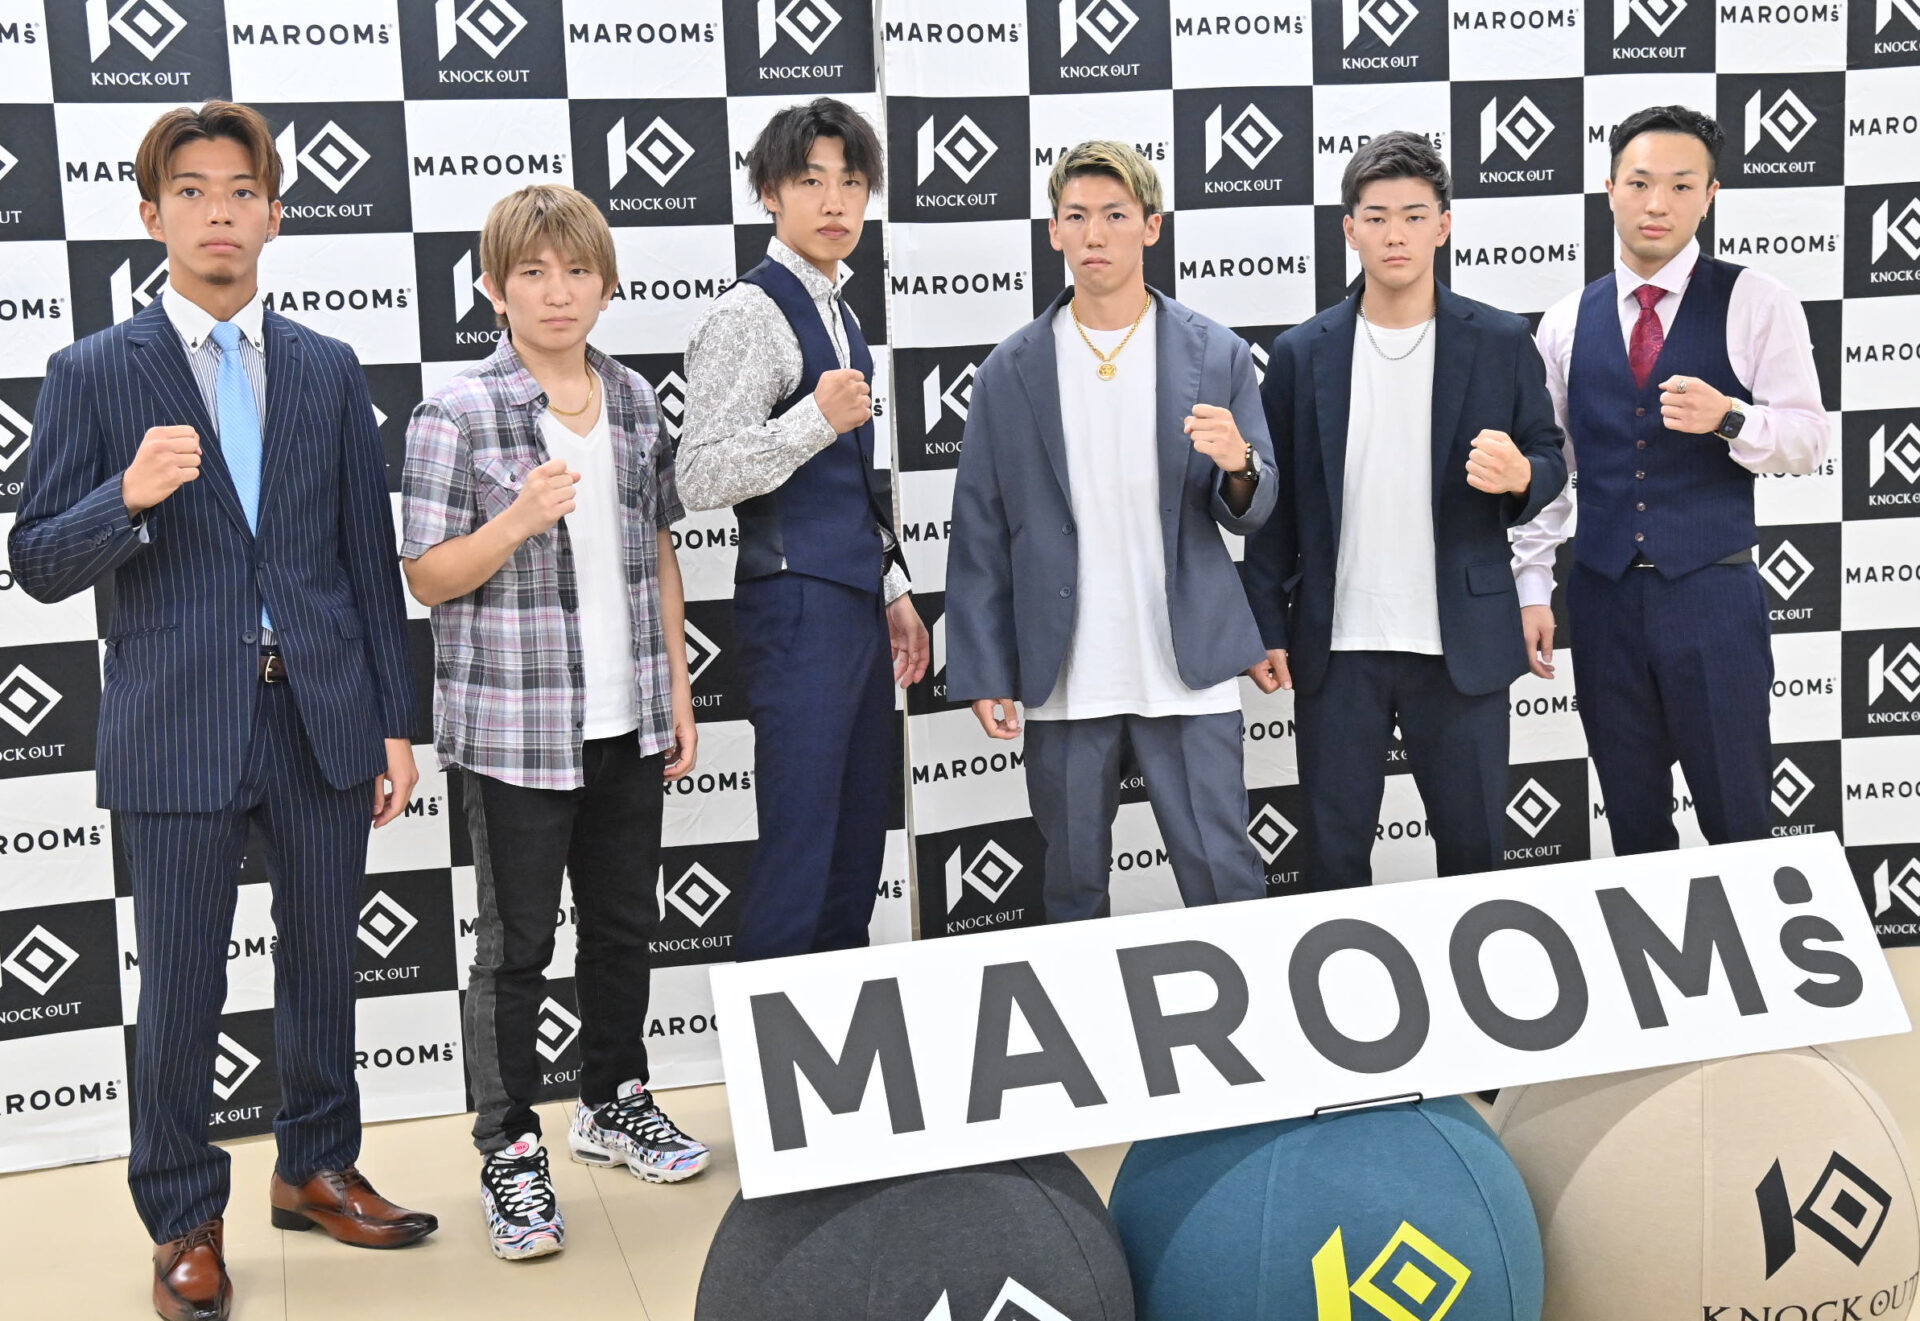 『MAROOMS presents KNOCK OUT 2023 vol.3』対抗戦出場の6選手。左からKNOCK OUTの雅治、工藤、森岡、K-1の内田、豊田、水津  （C）KNOCK OUT